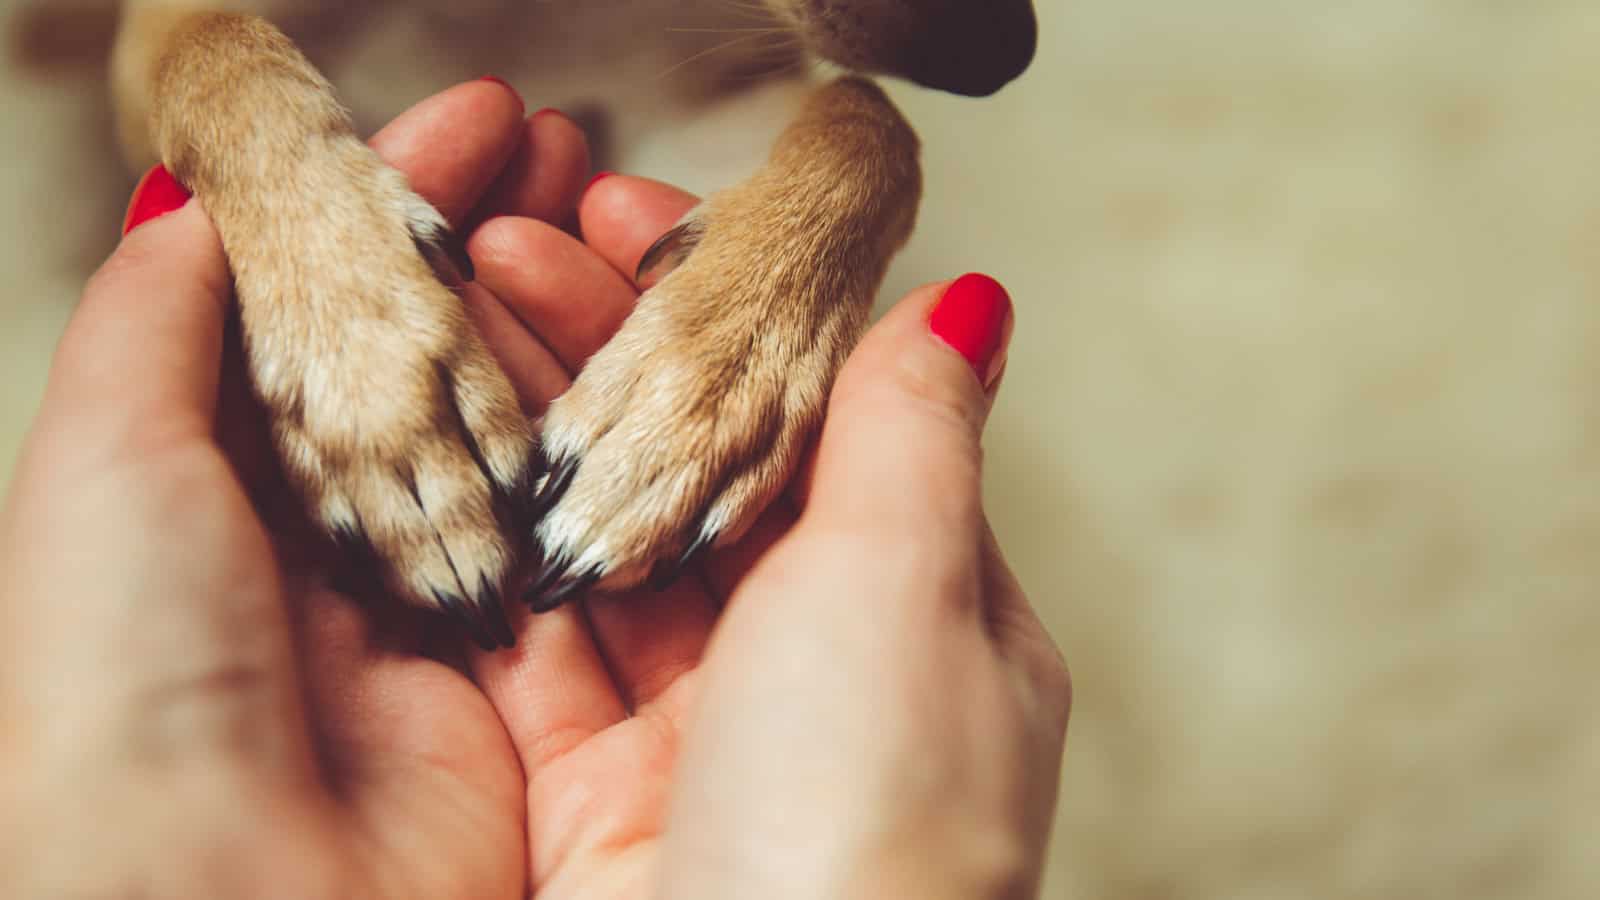 woman holding dog's paws.